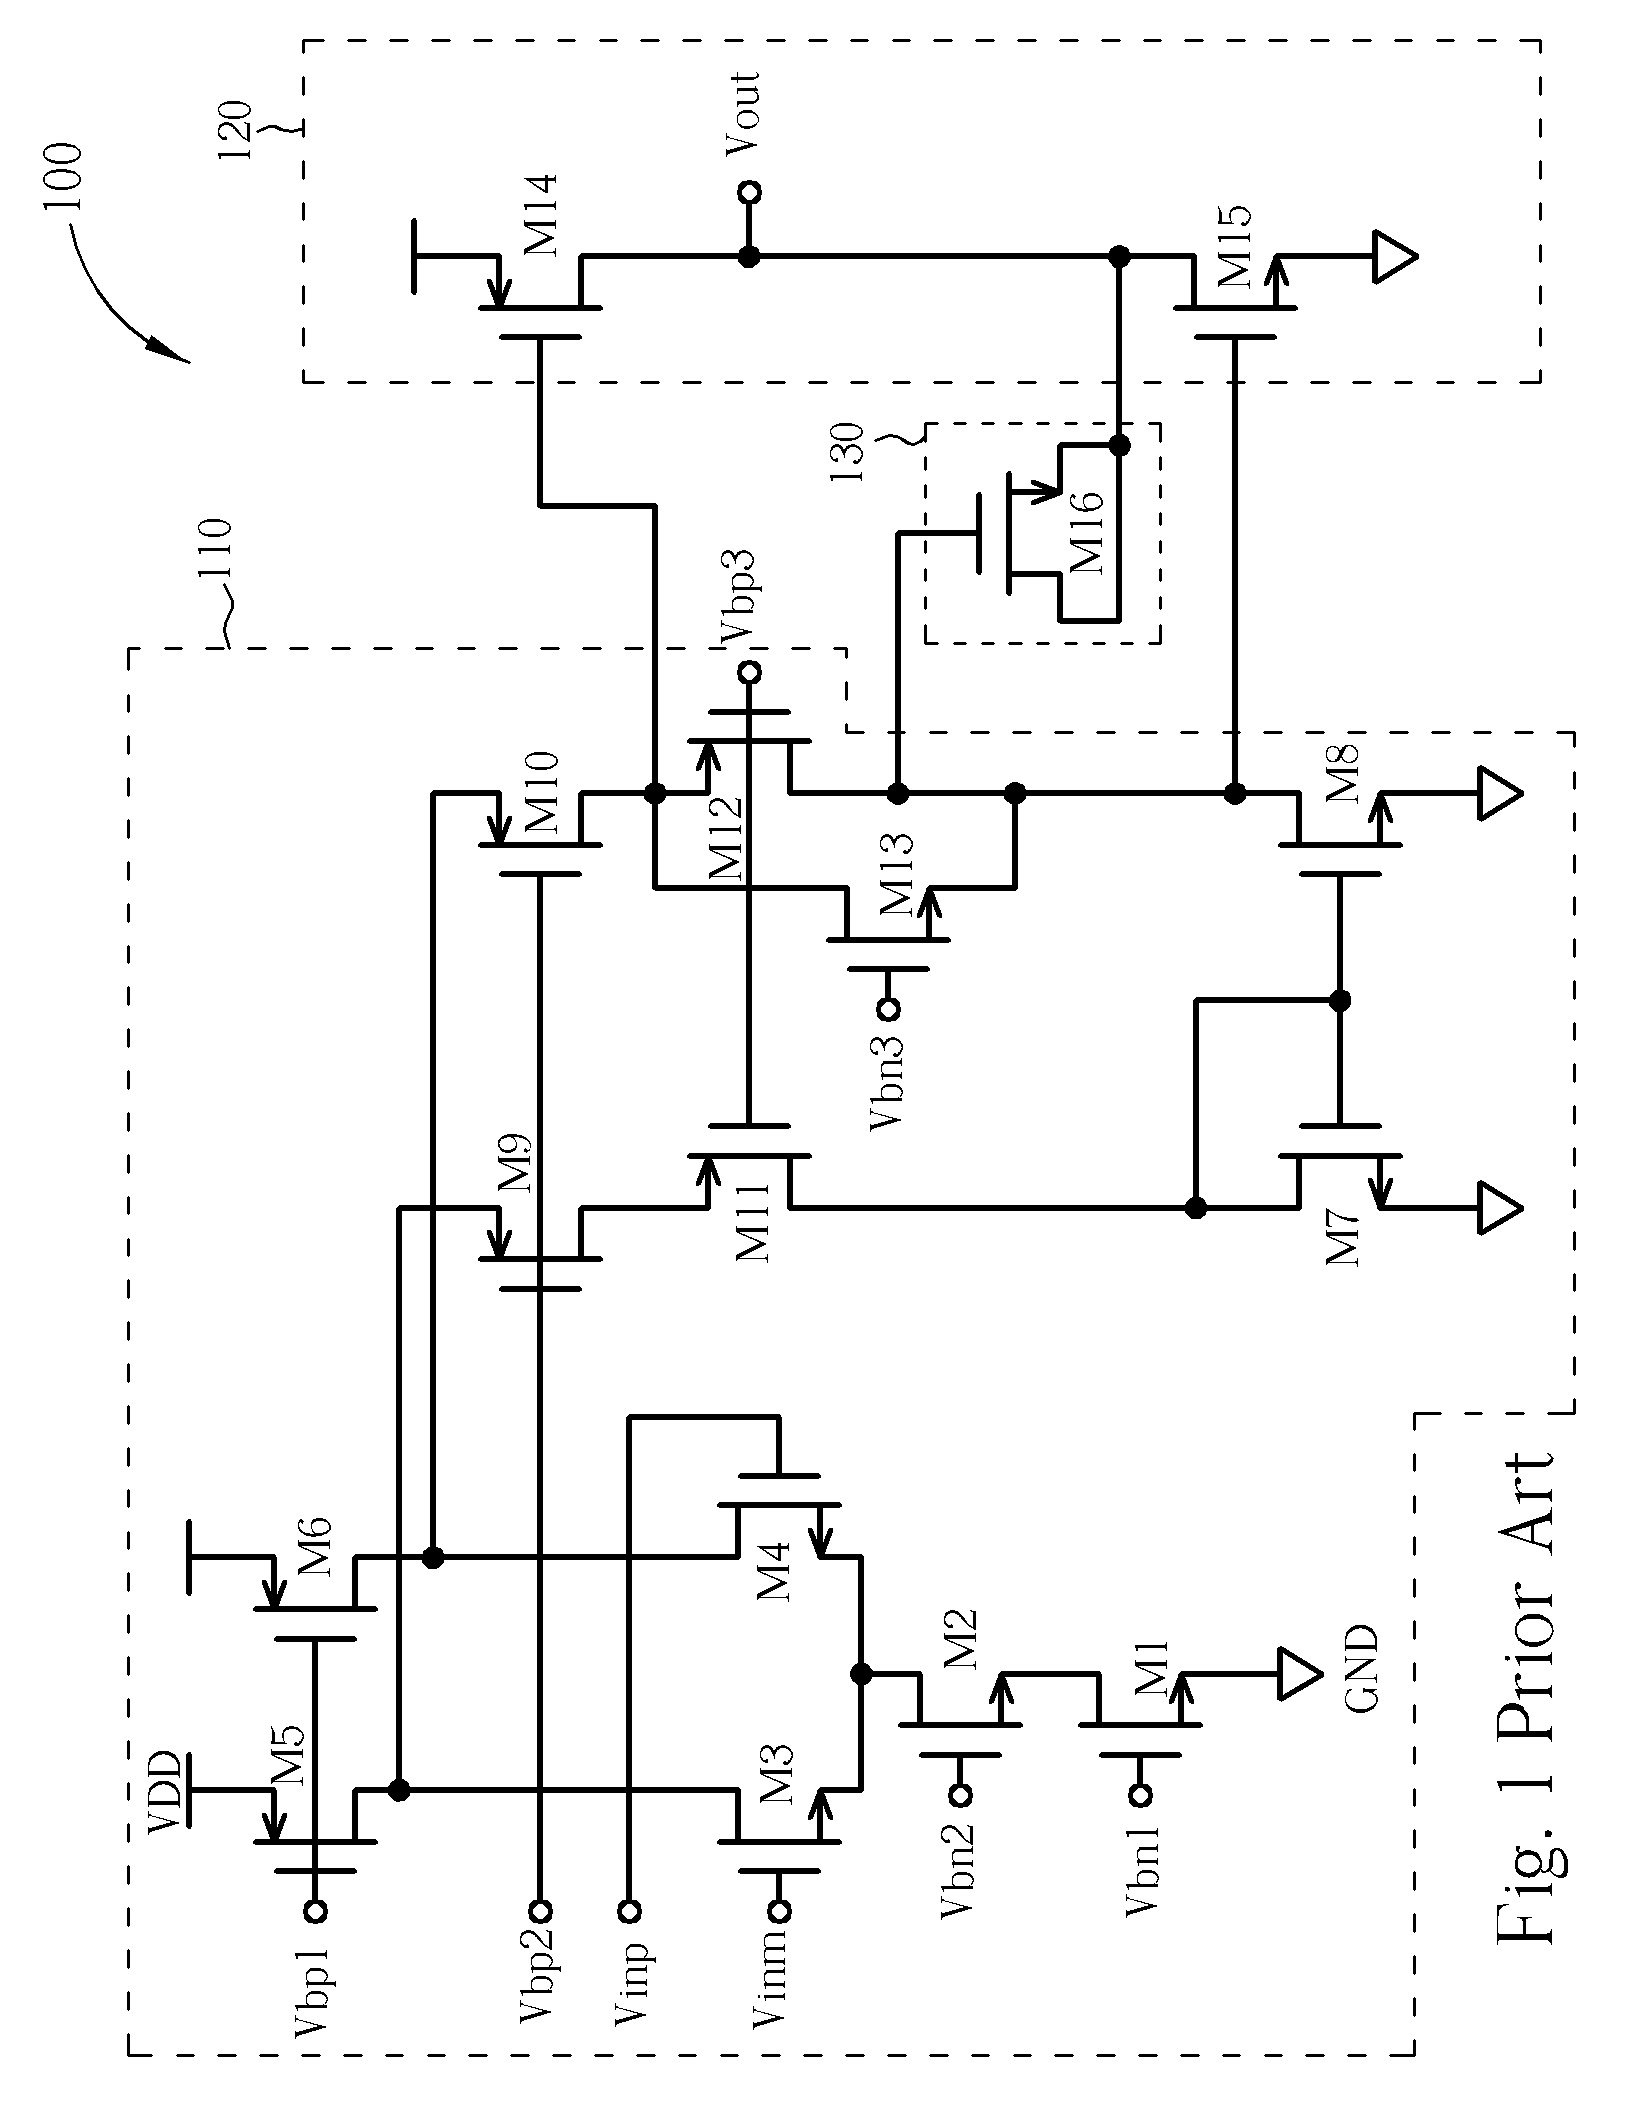 Amplifier circuit having a compensation circuit coupled to an output node of an operational amplifier for improving loop stability